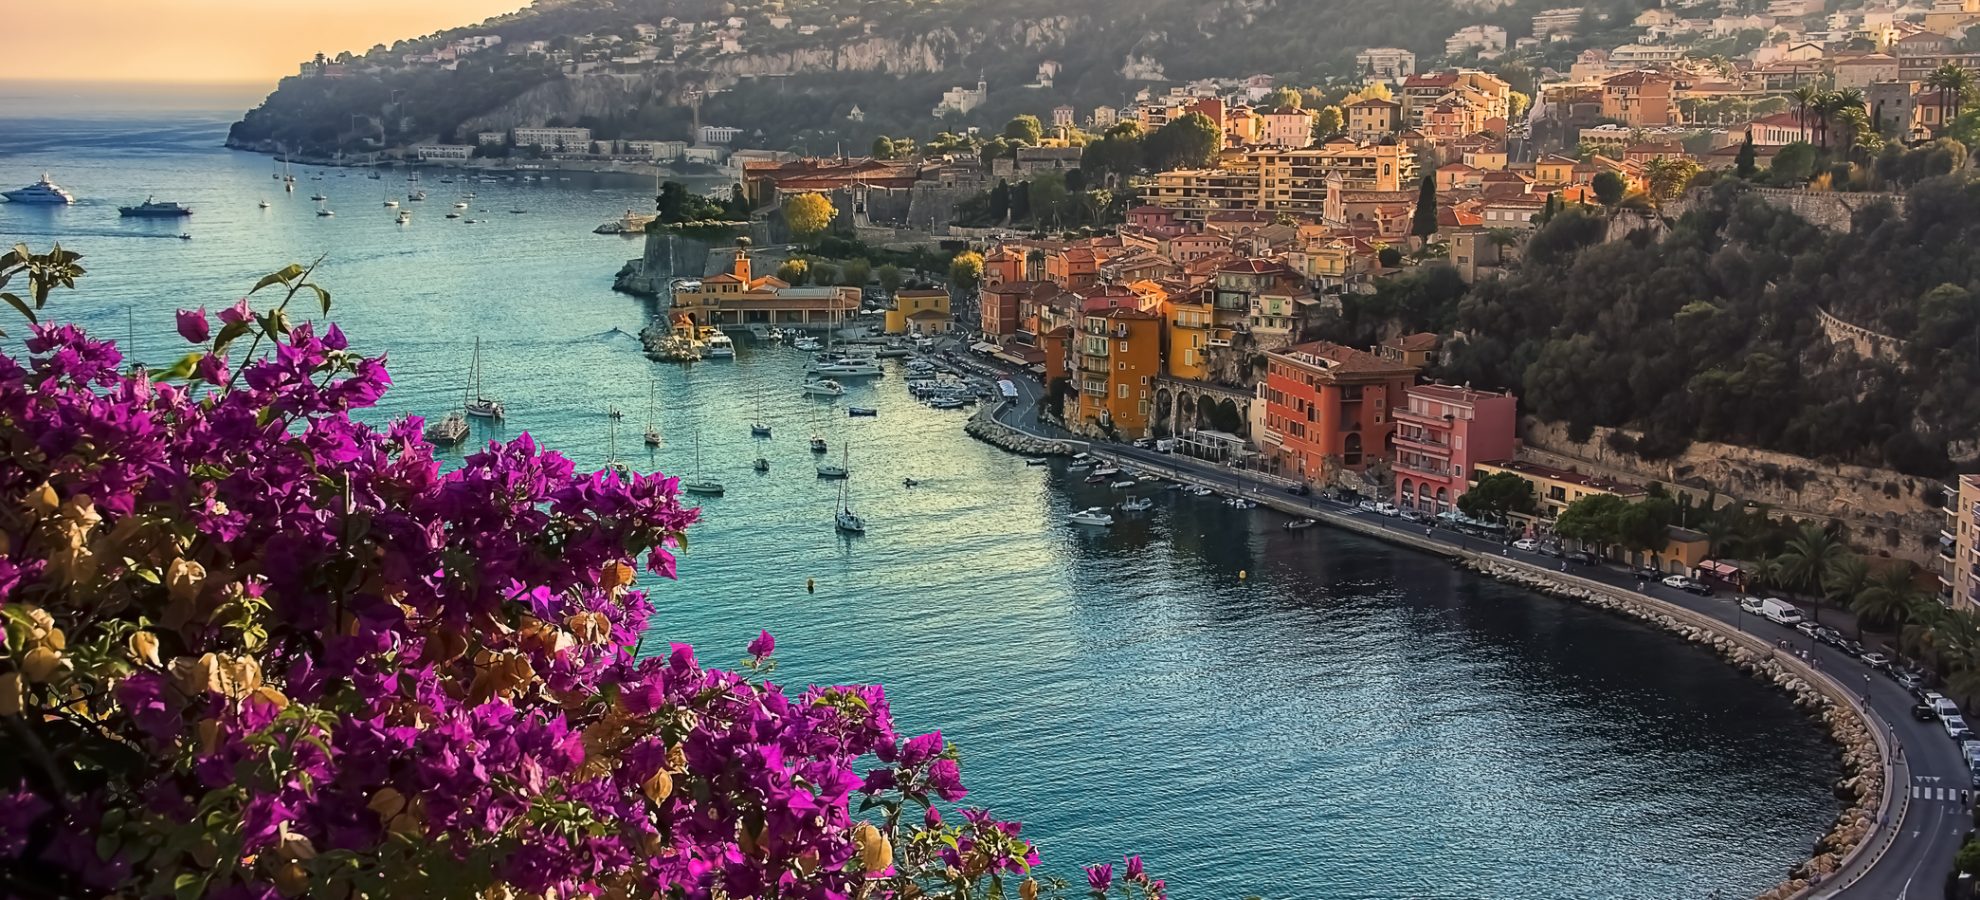 Coastline on the French Riviera with the small village - Villefranche Sur Mer